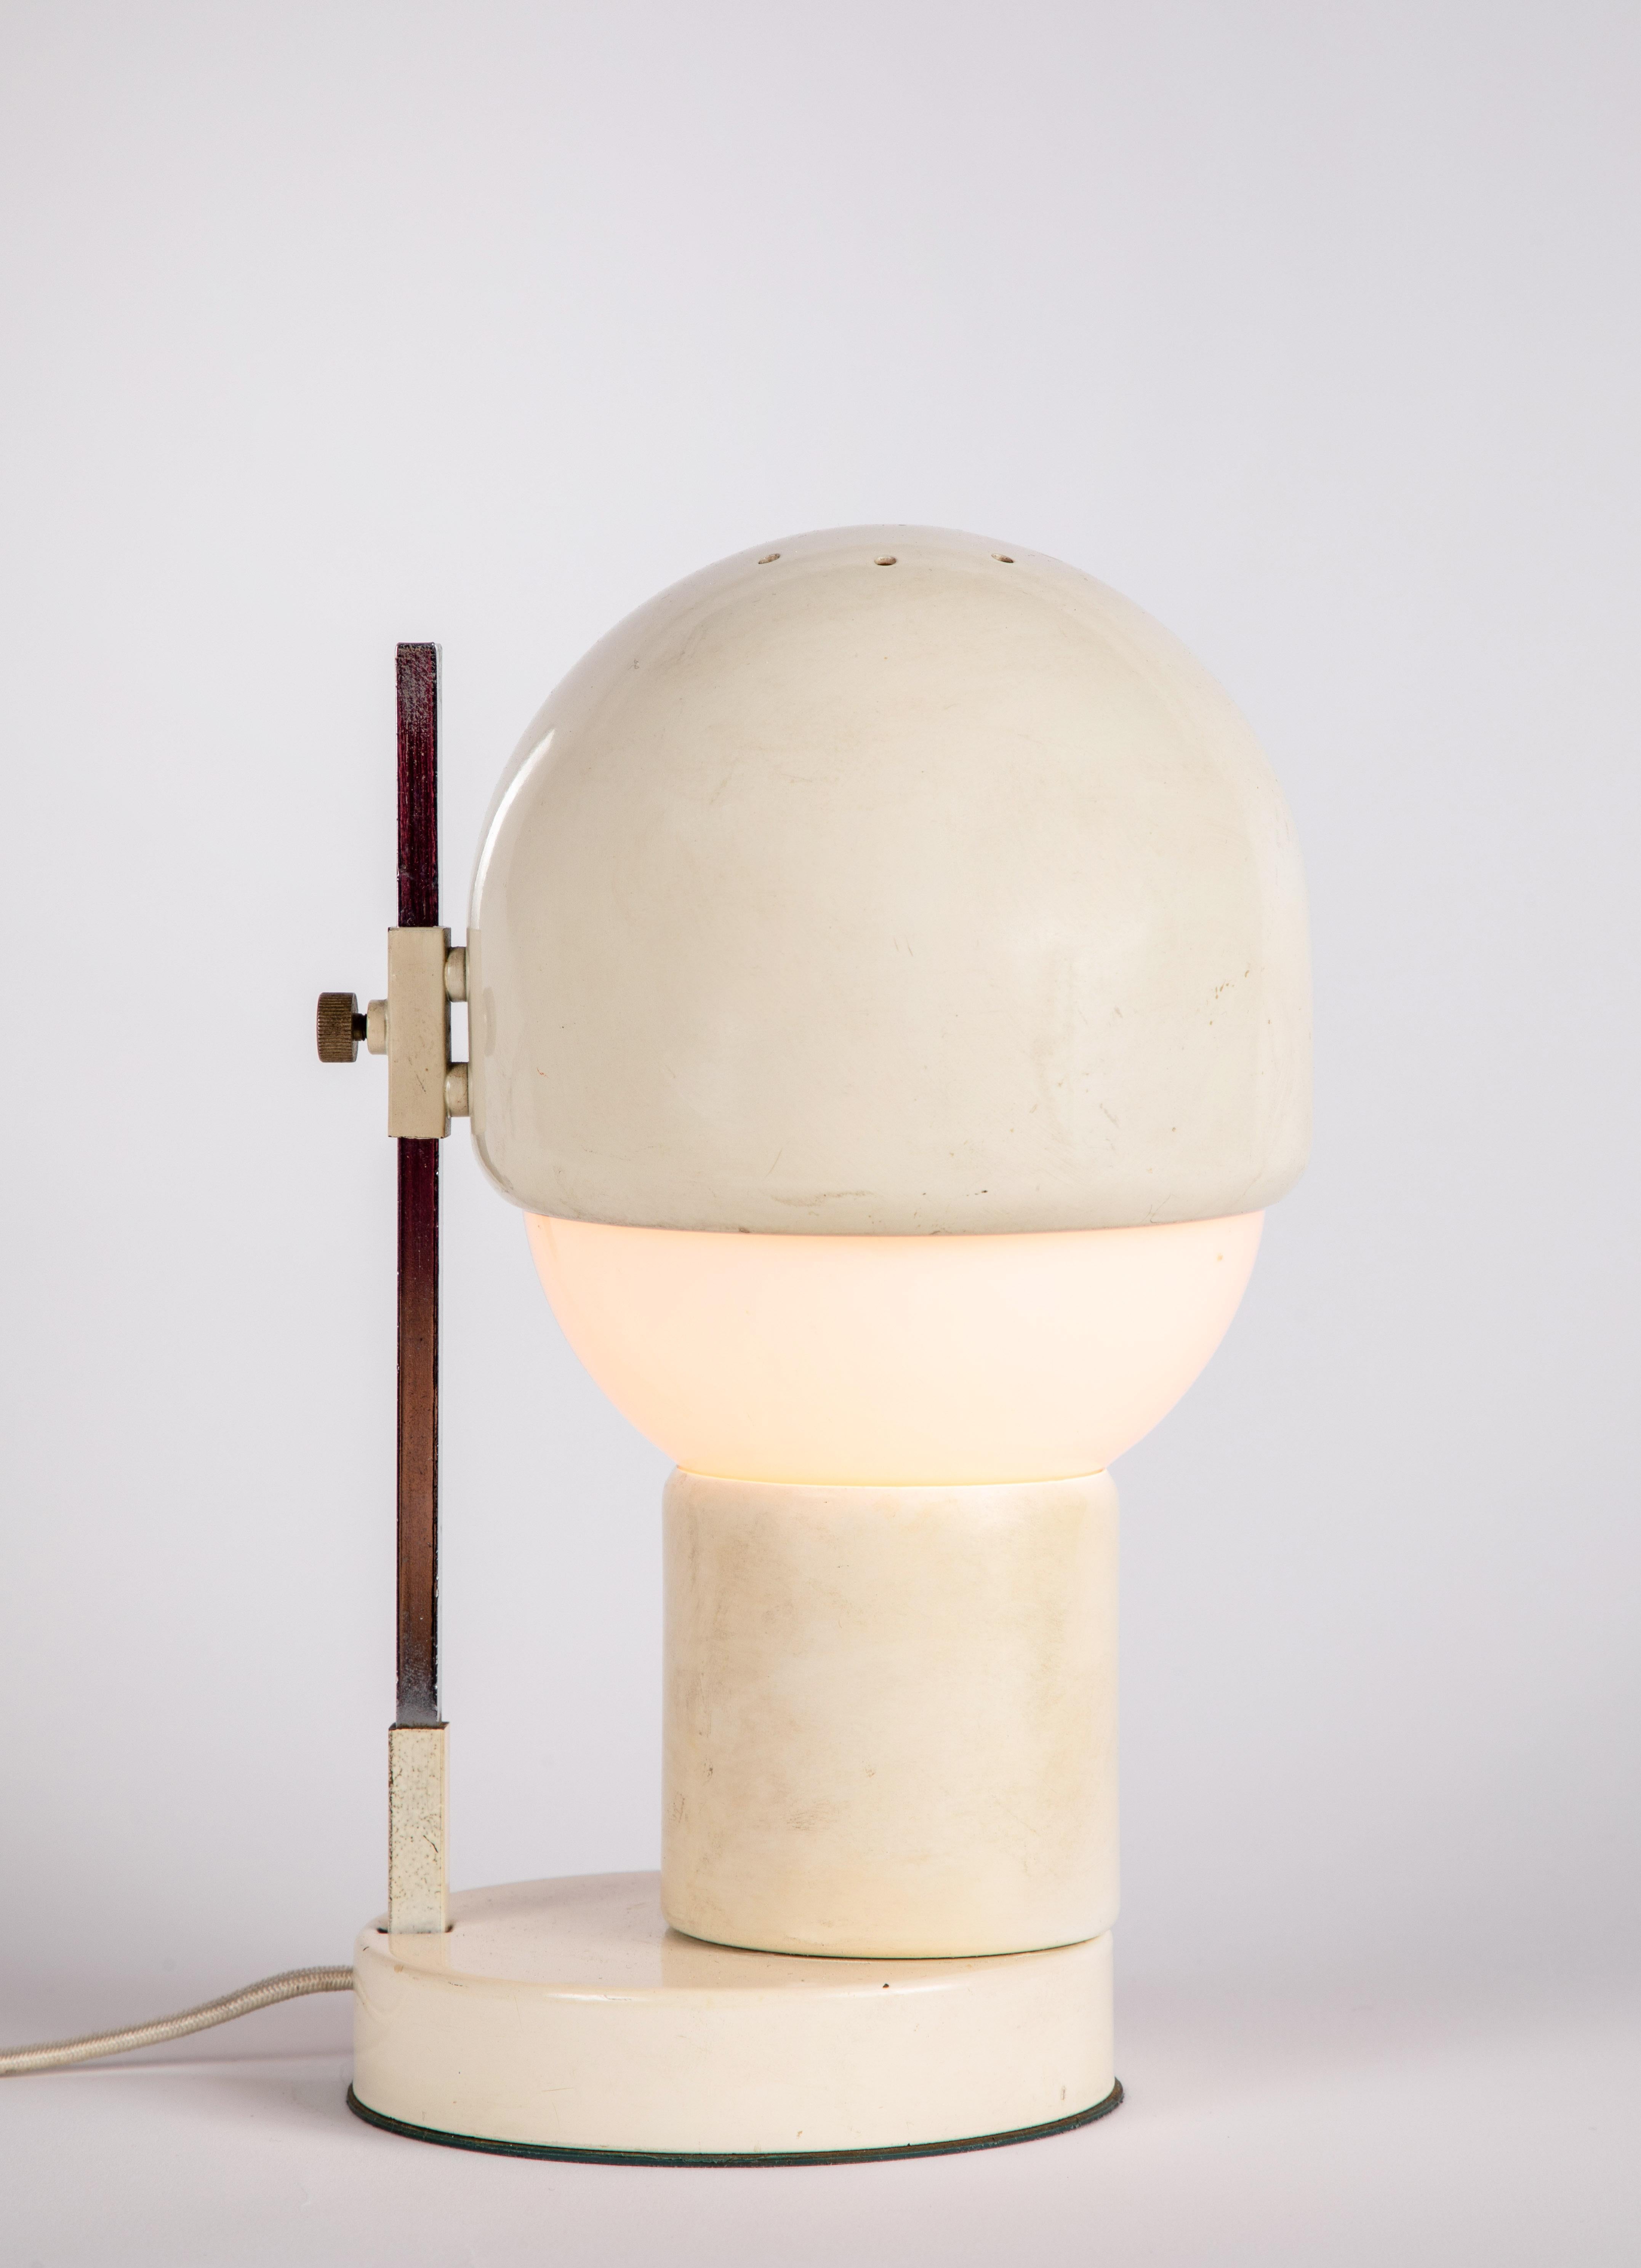 1960s white glass and metal table lamp attributed to Angelo Lelli for Arredoluce. A refined design executed in white painted metal, nickel and blown opaline glass. Metal shade can be adjusted up and down over the glass. An exquisite example highly